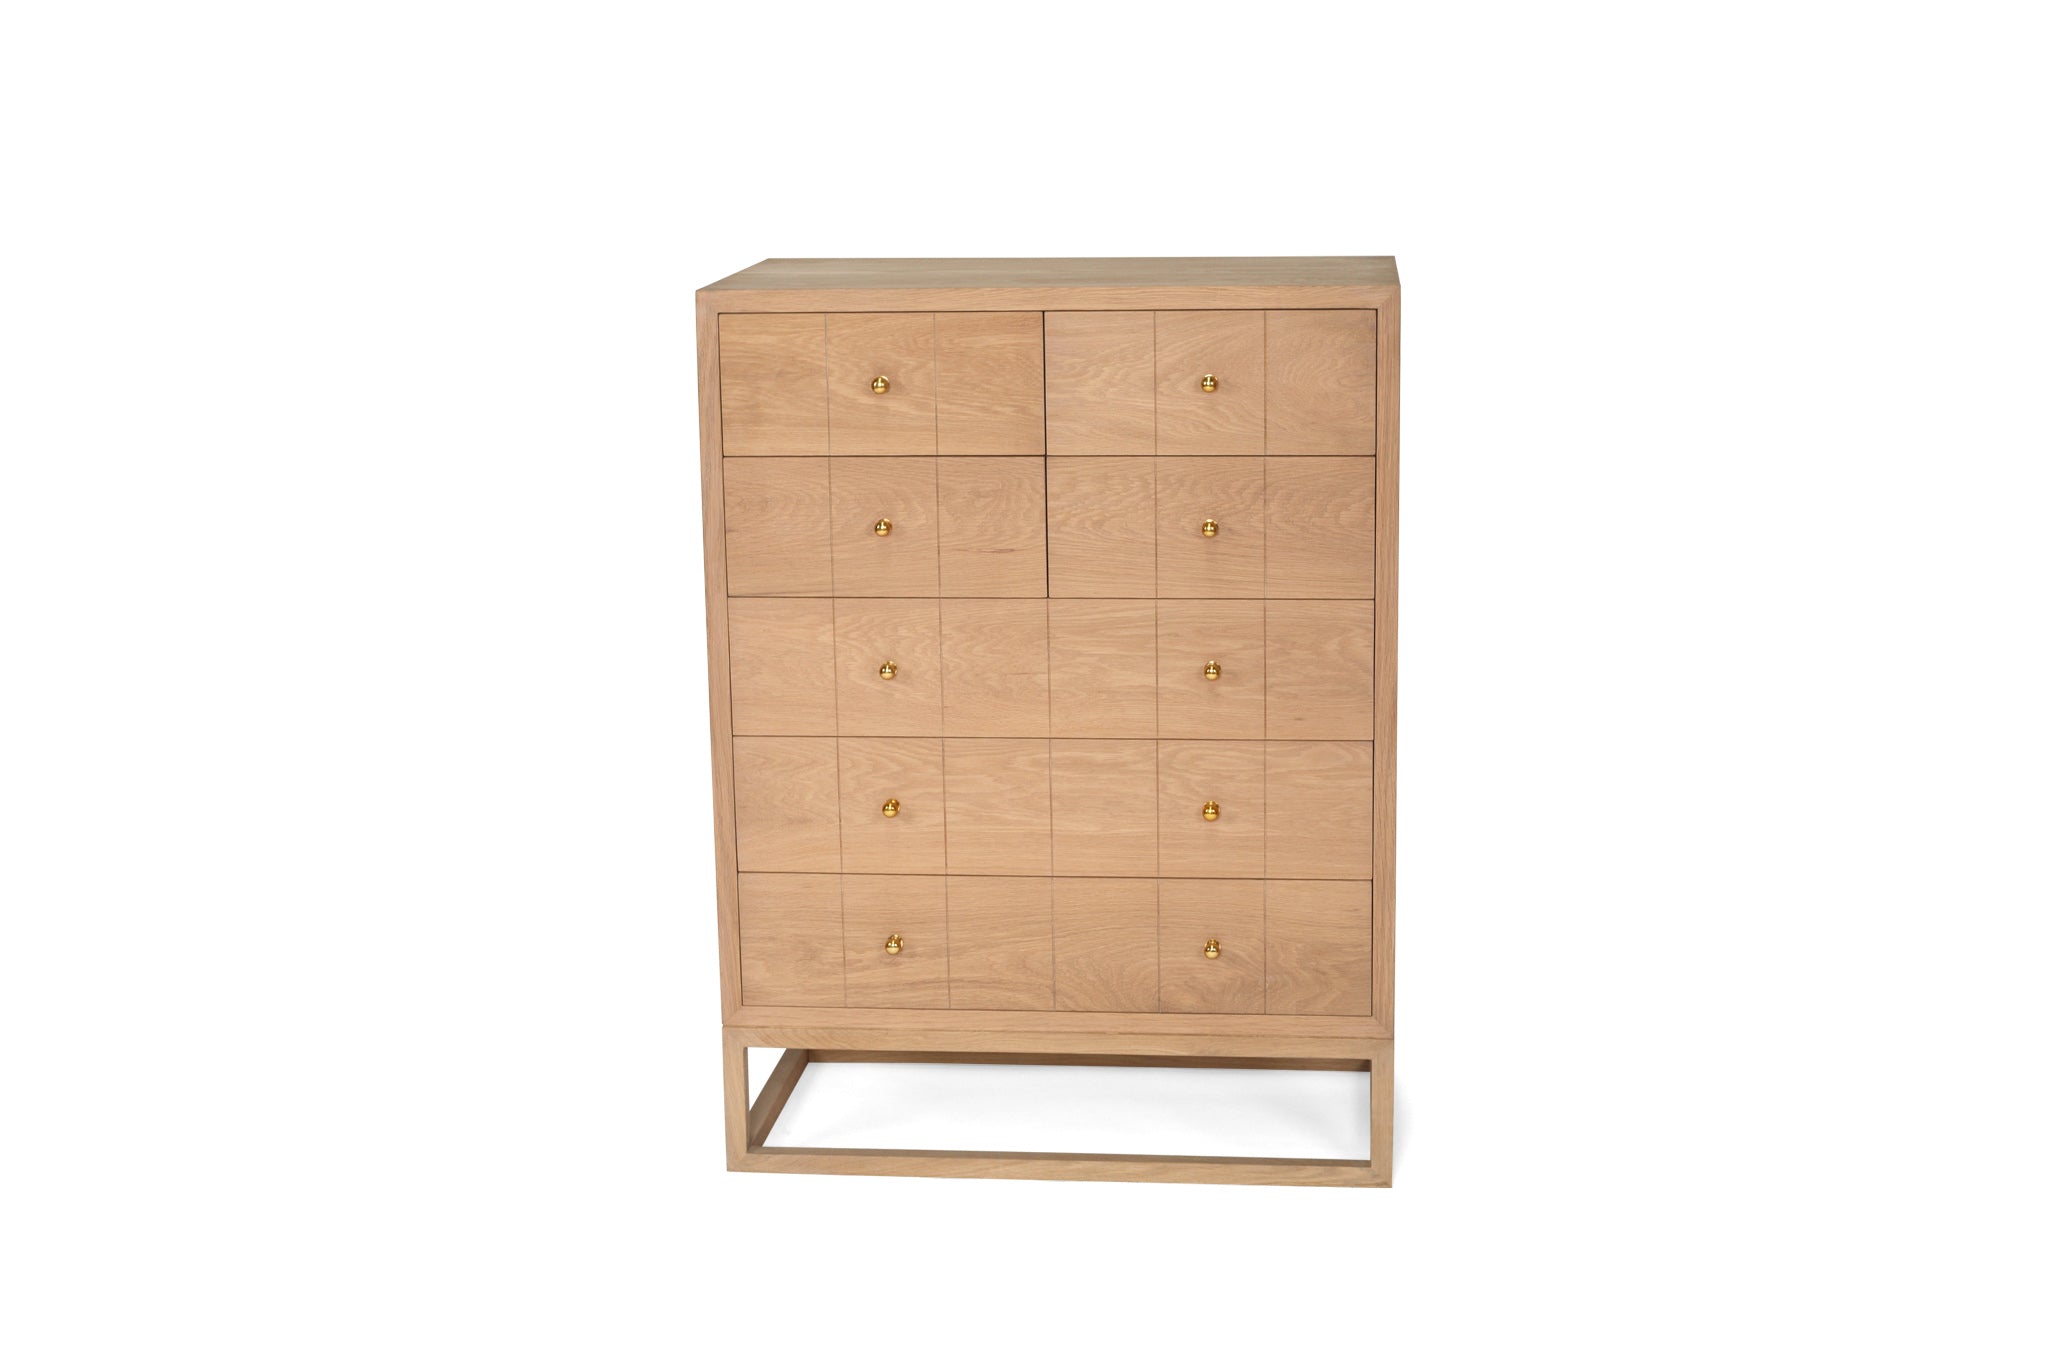 Coogee American Oak Chest Of Drawers – Tallboy – 7 drawers